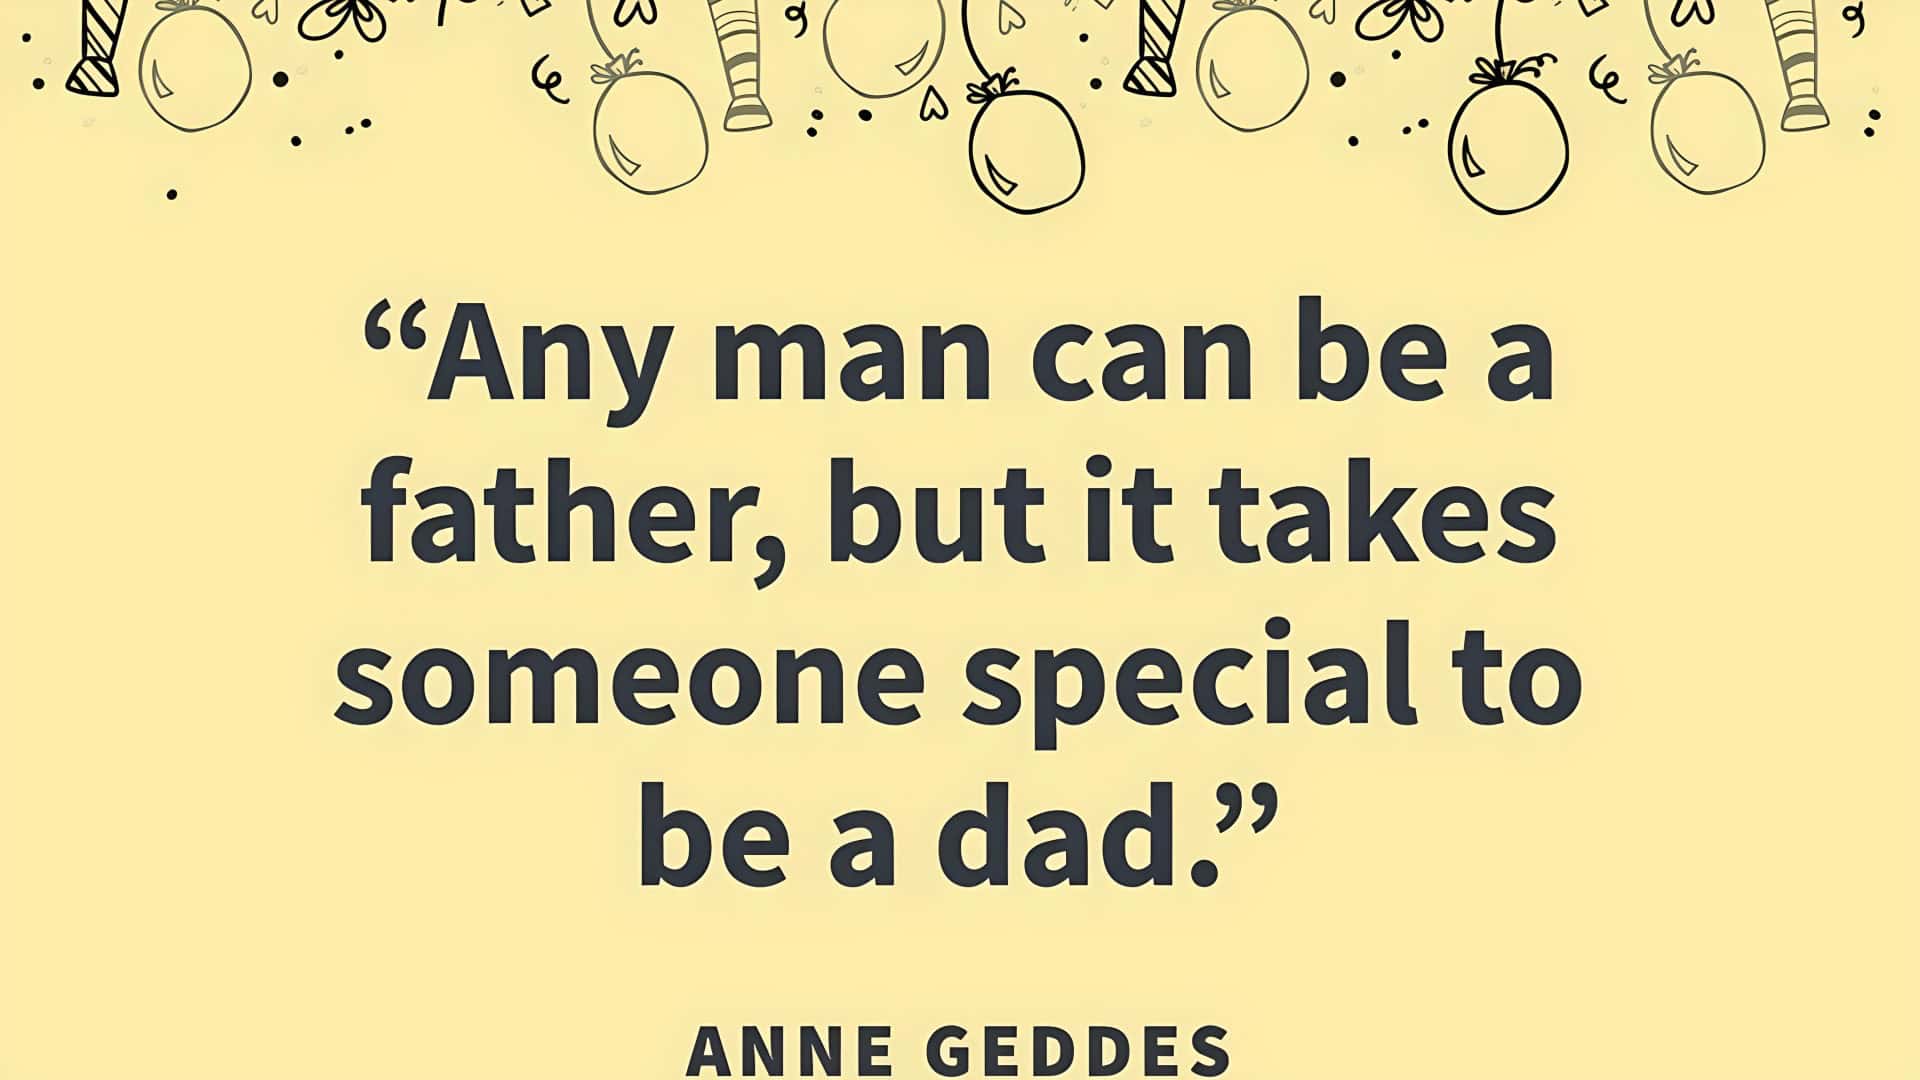 Inspirational Quotes to Celebrate Dad